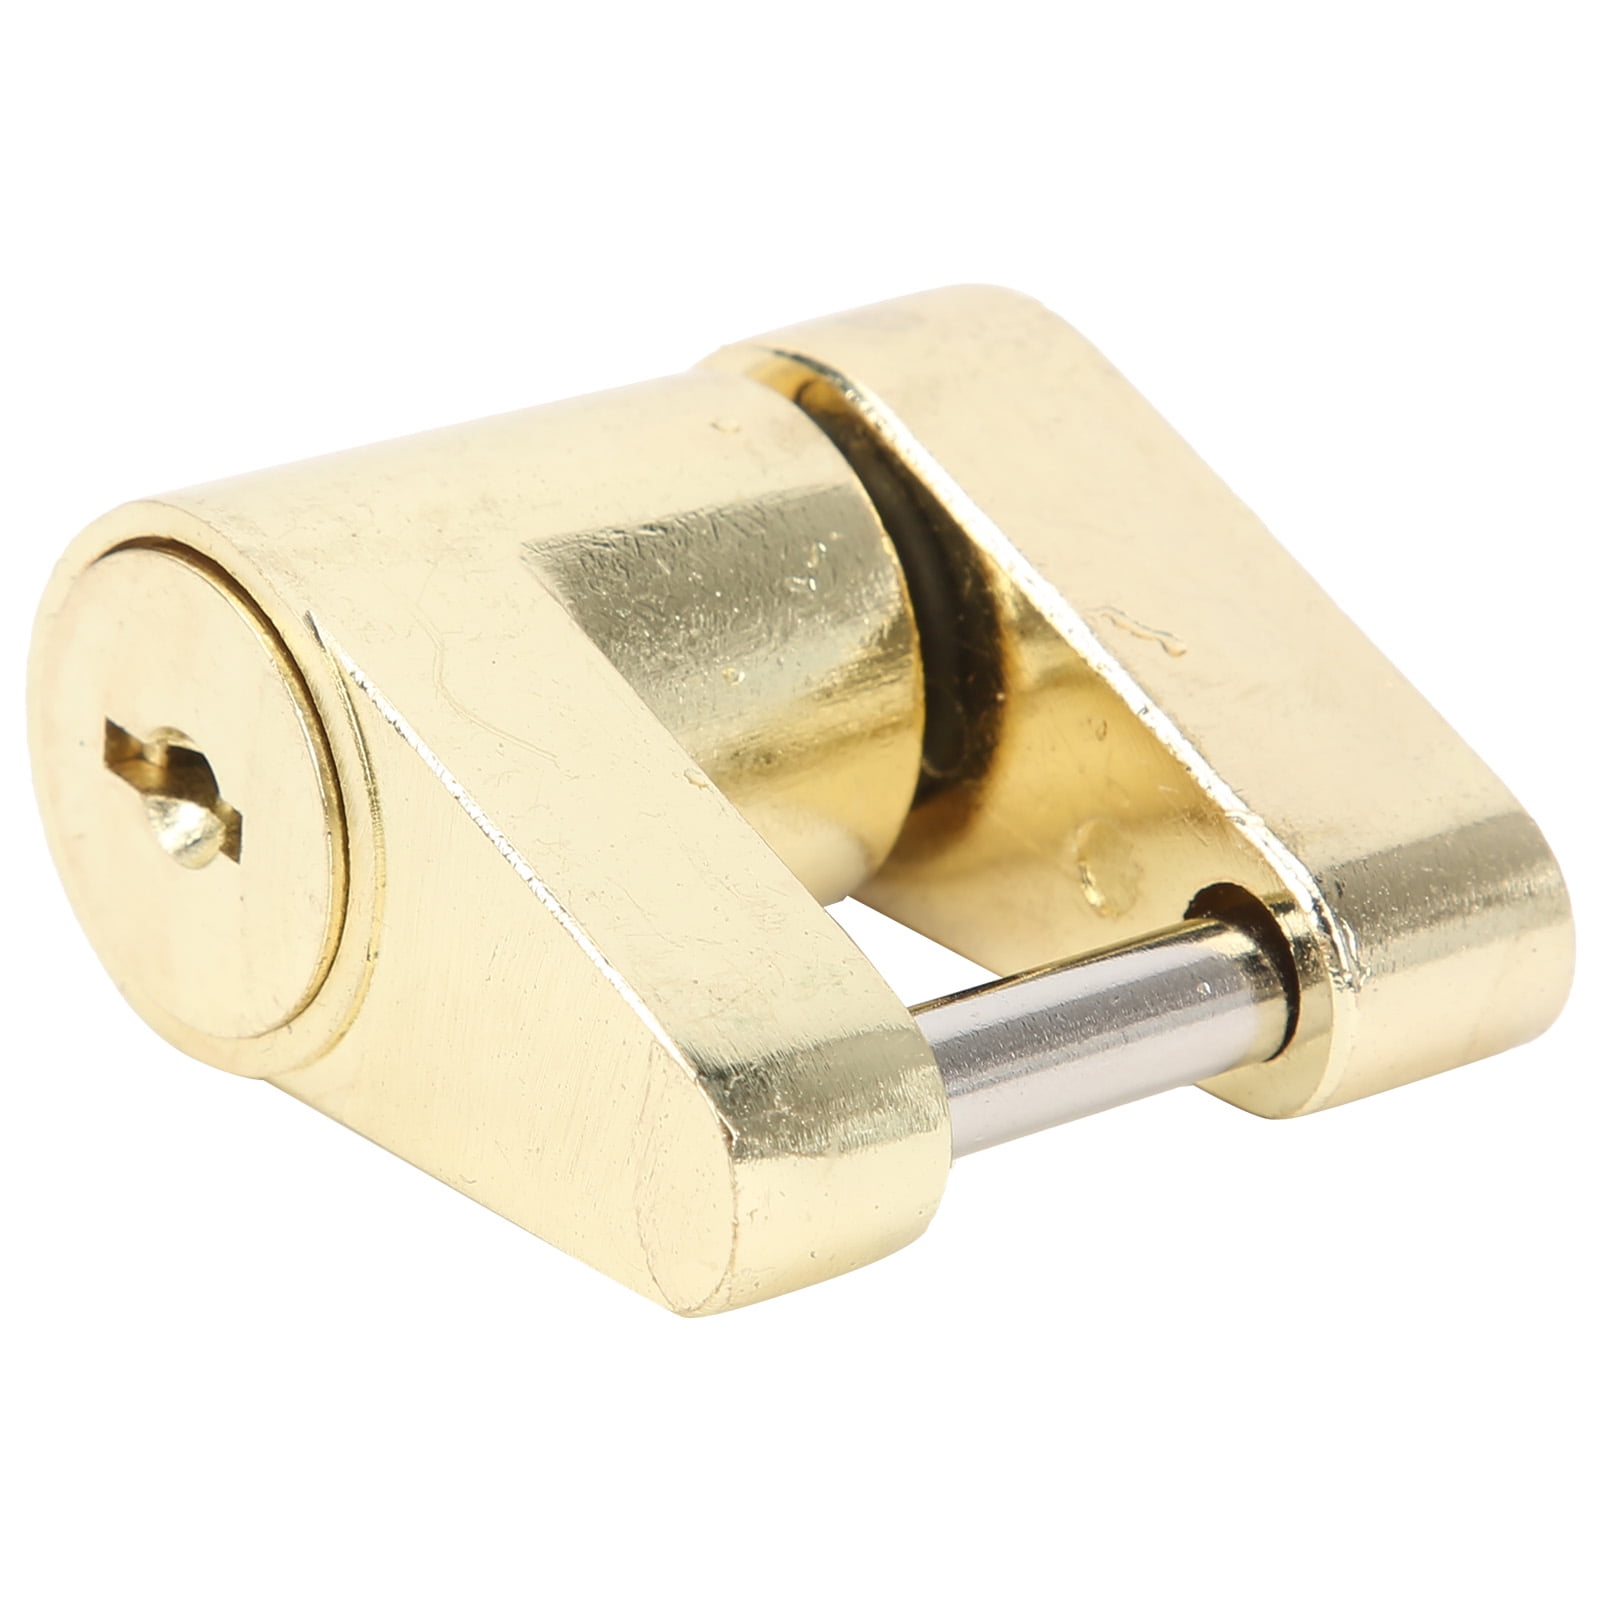 Lock and secure the trailer coupler connection and protect against theft 